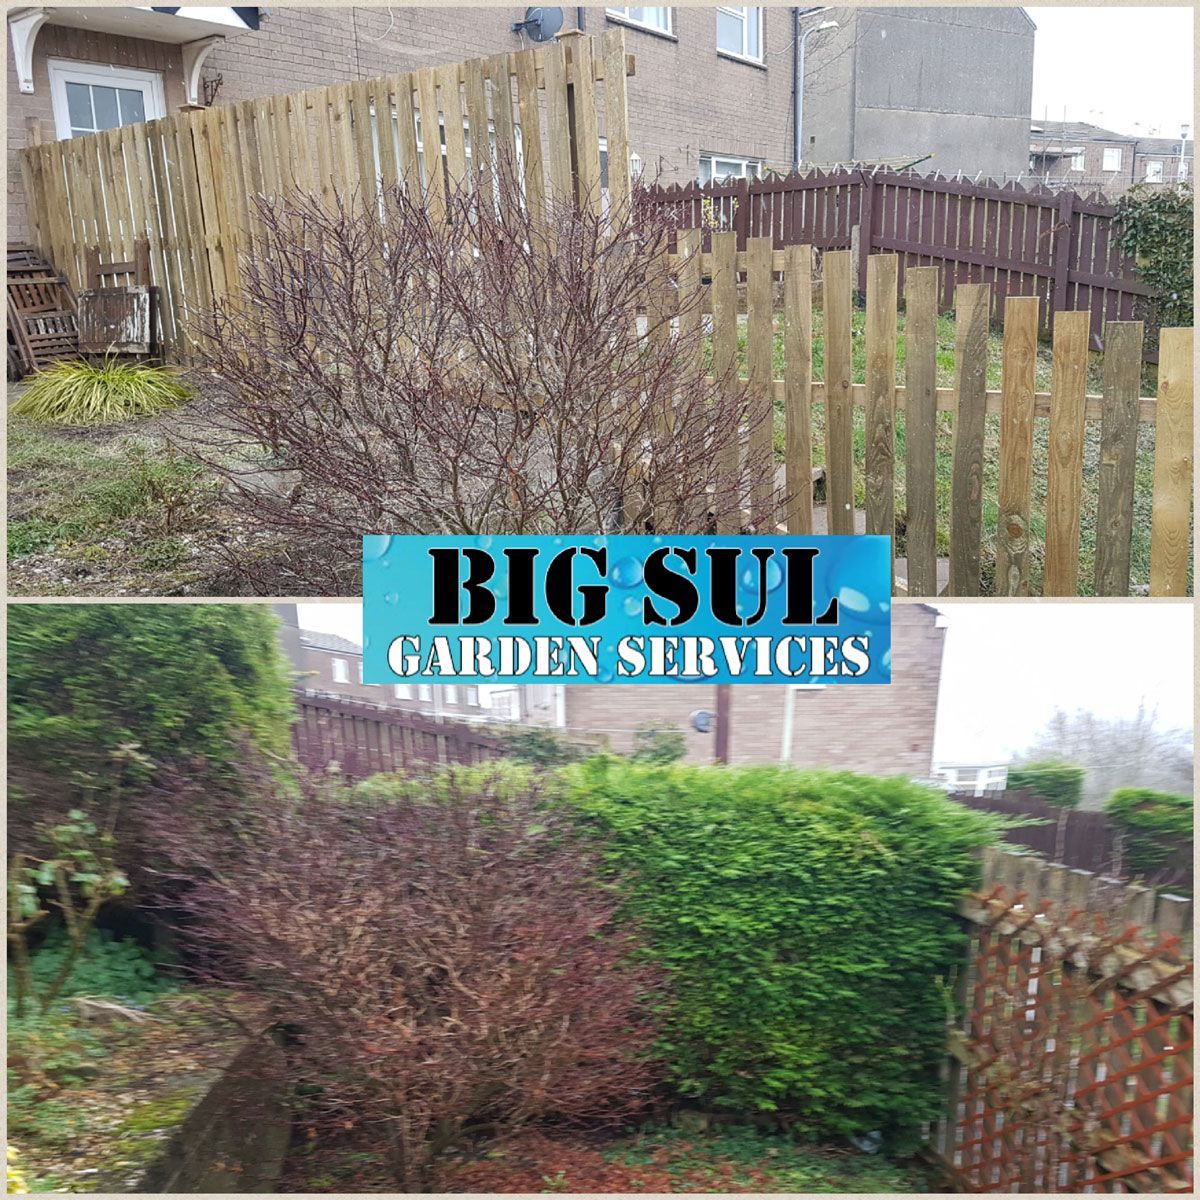 Hedge removed for this customer and new fencing installed around the property